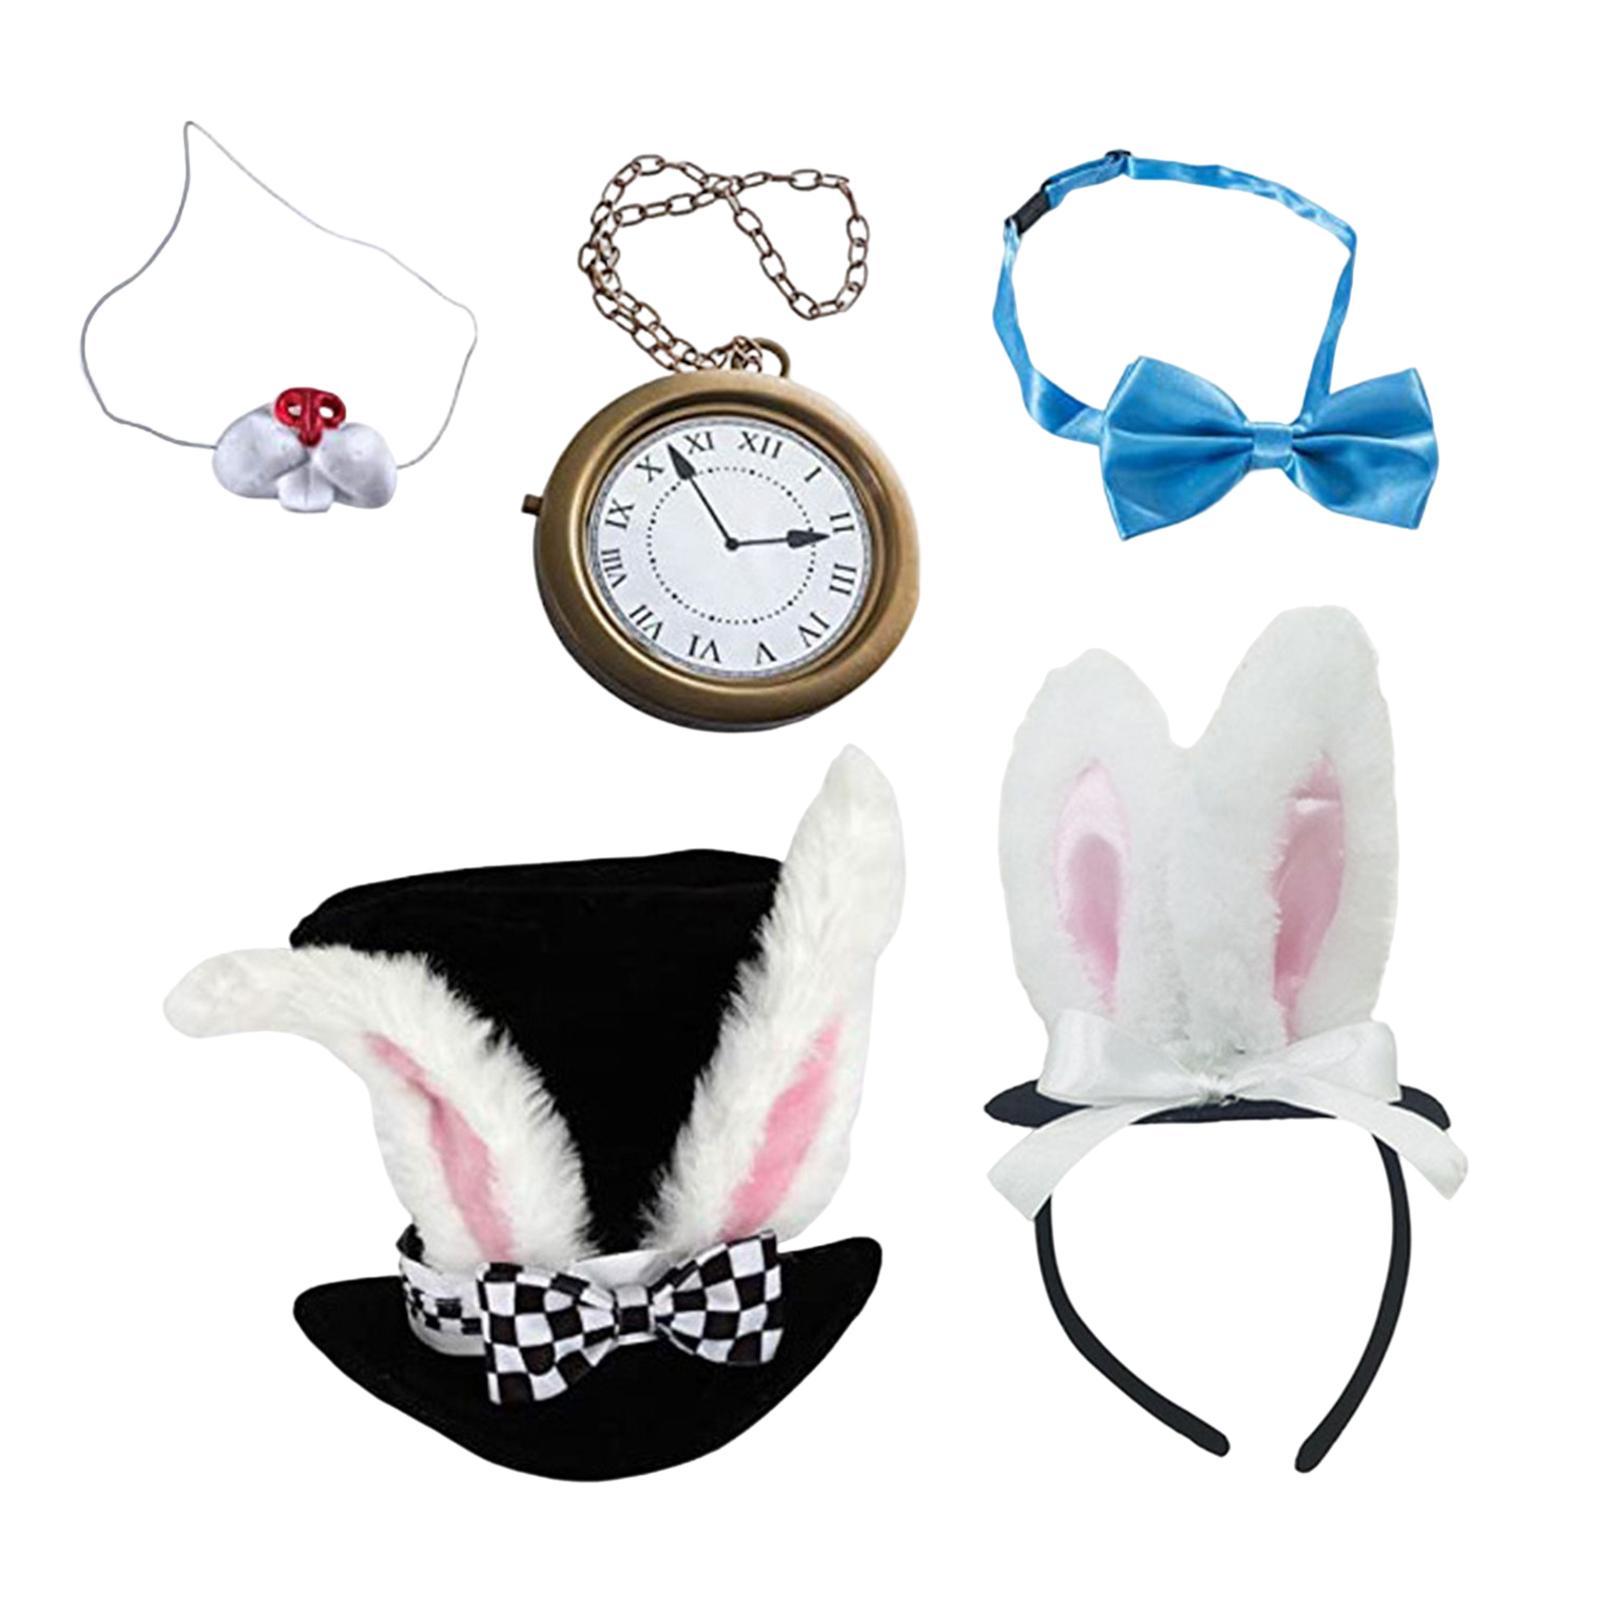 Easter White Rabbit Costume Pocket Watch Bunny Dress up Accessories Nose